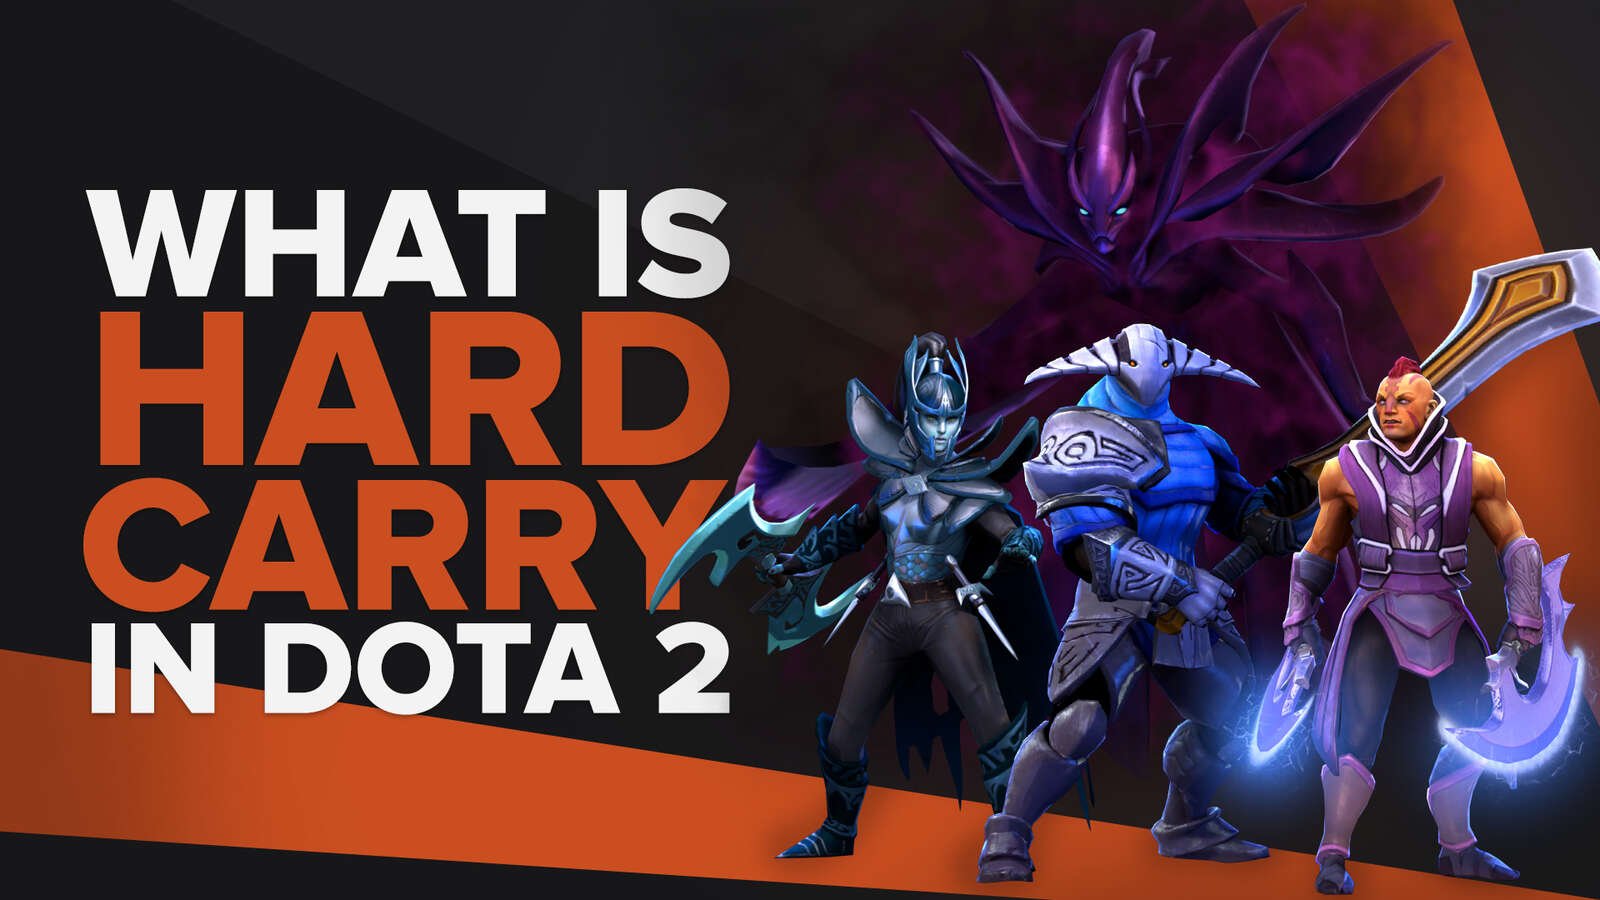 What Does it Mean to be a Hard Carry in Dota 2?